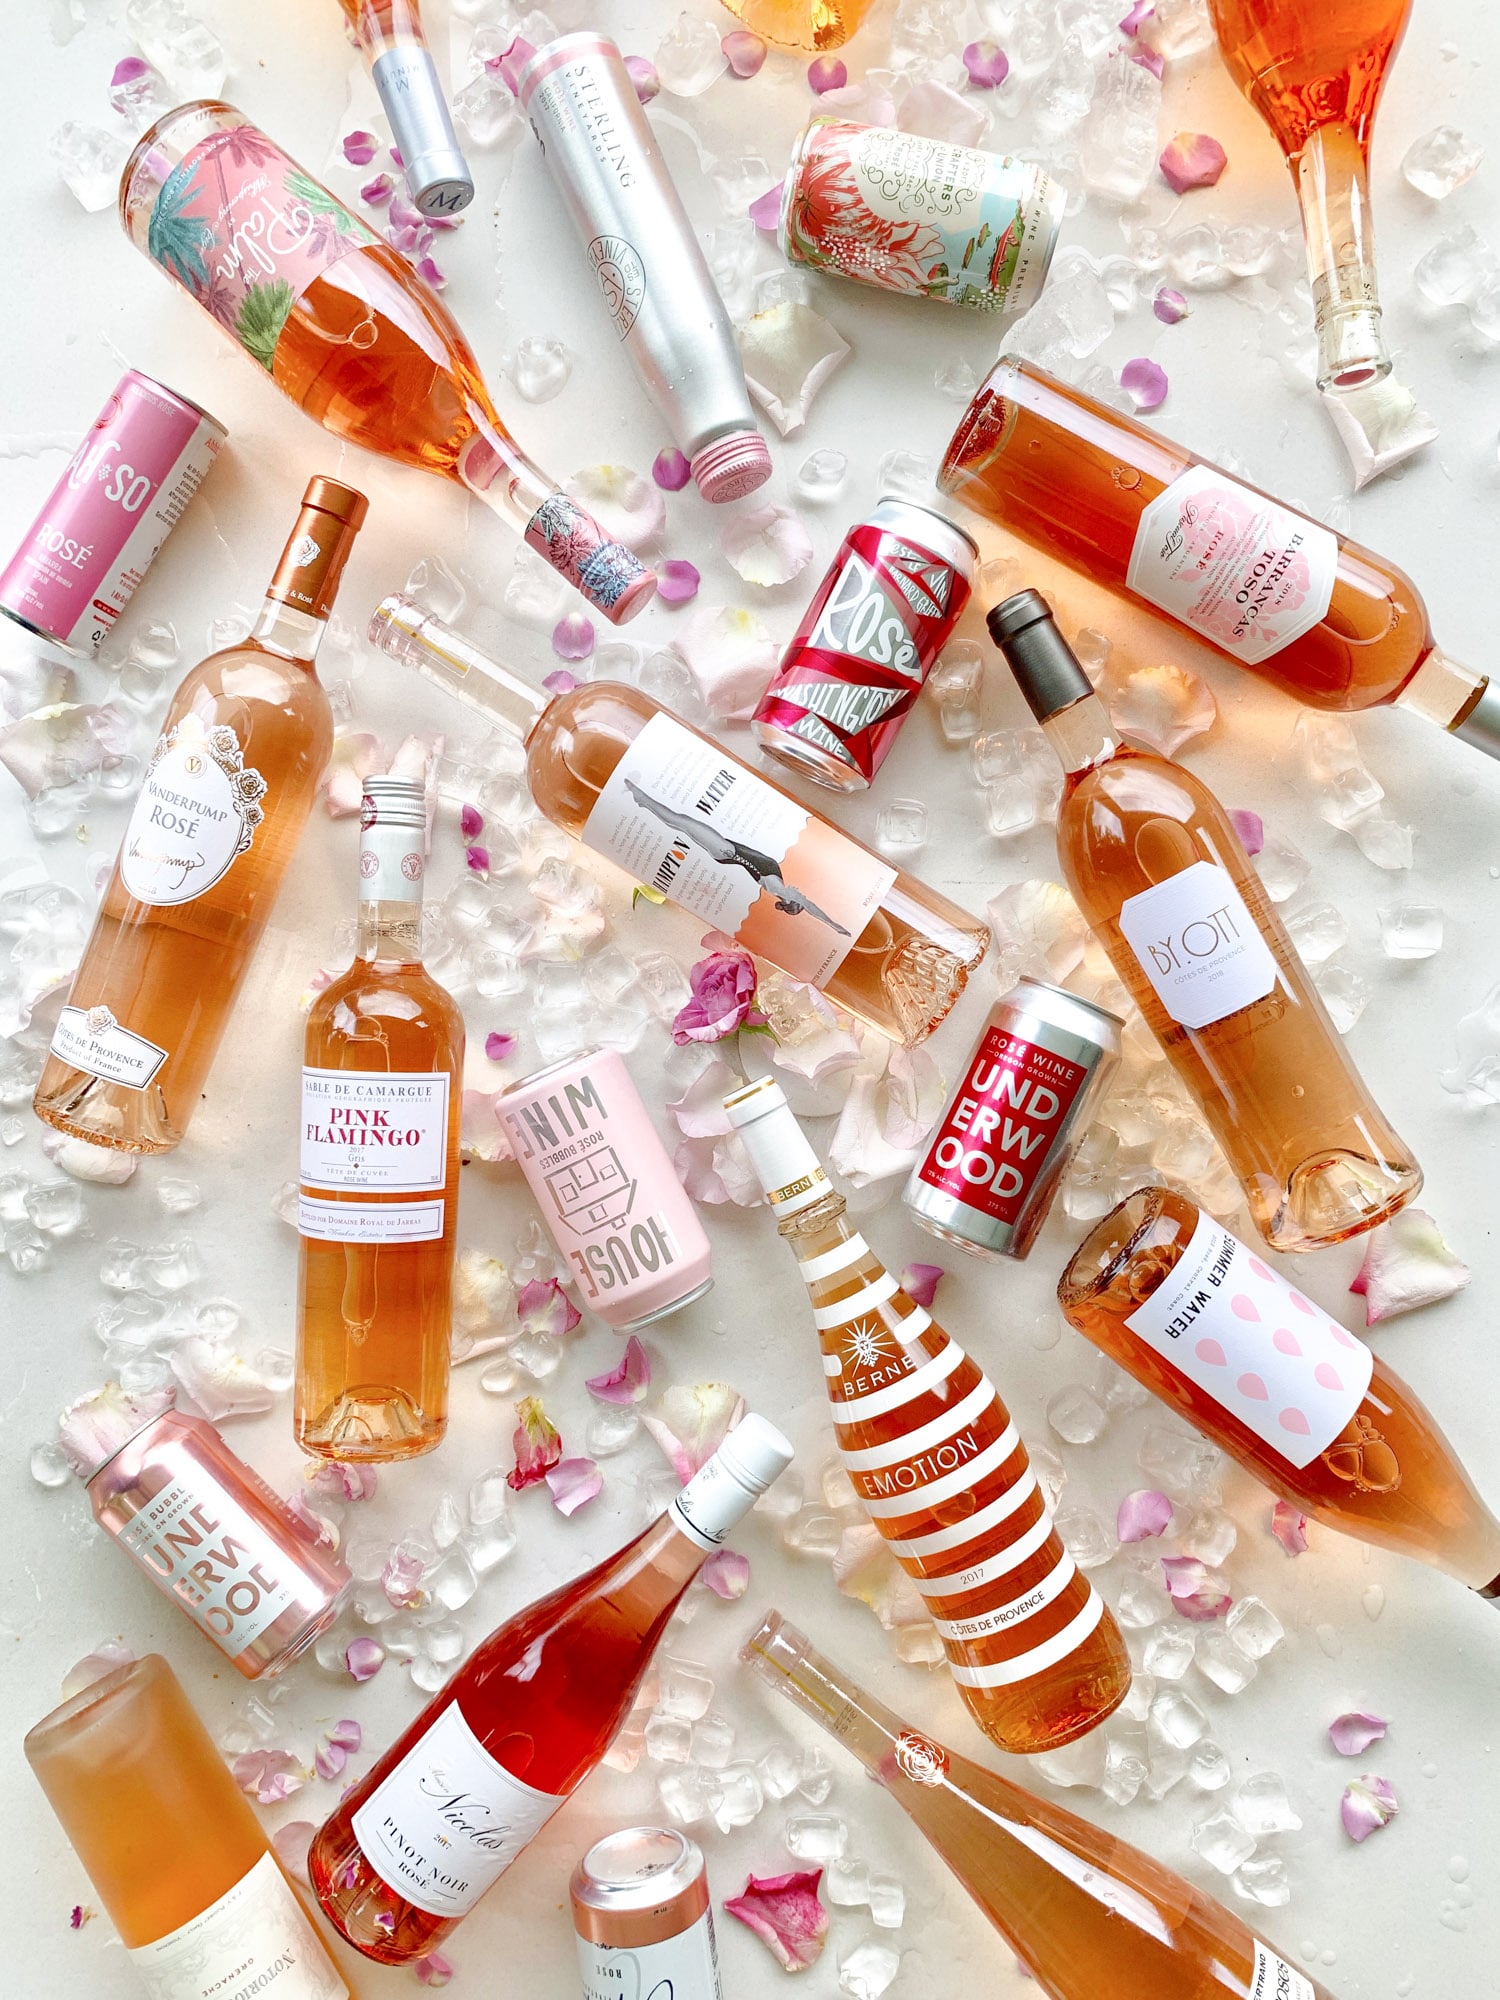 My summer 2019 rosé guide is here! All of my favorites, categorized by priced point and even including canned rosé. So perfect with a wedge of cheese. 